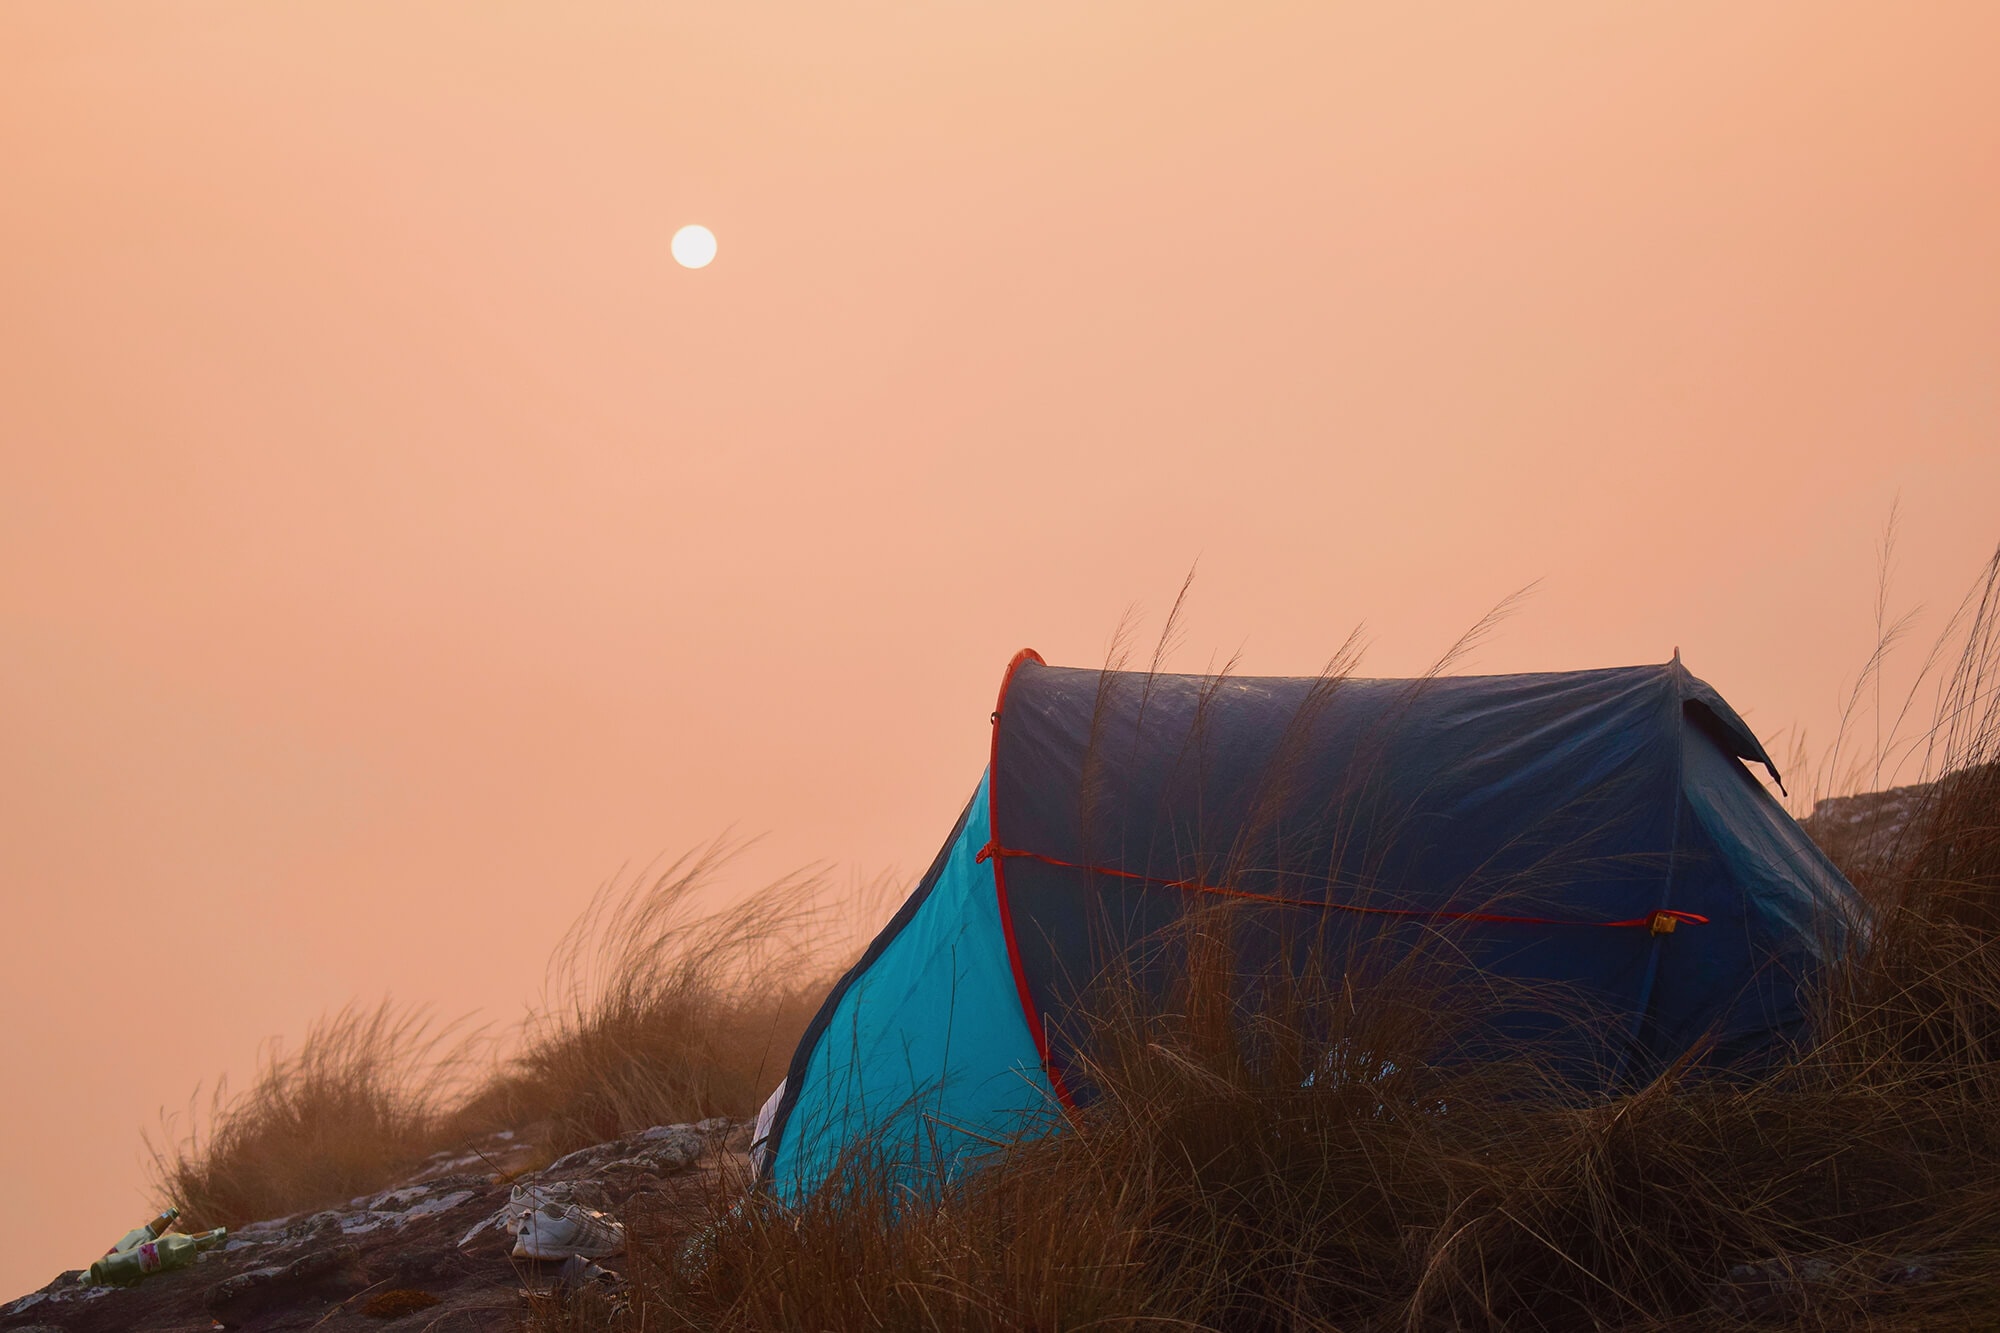 Dark Blackout Tent against the backdrop of a misty sky that is heating up